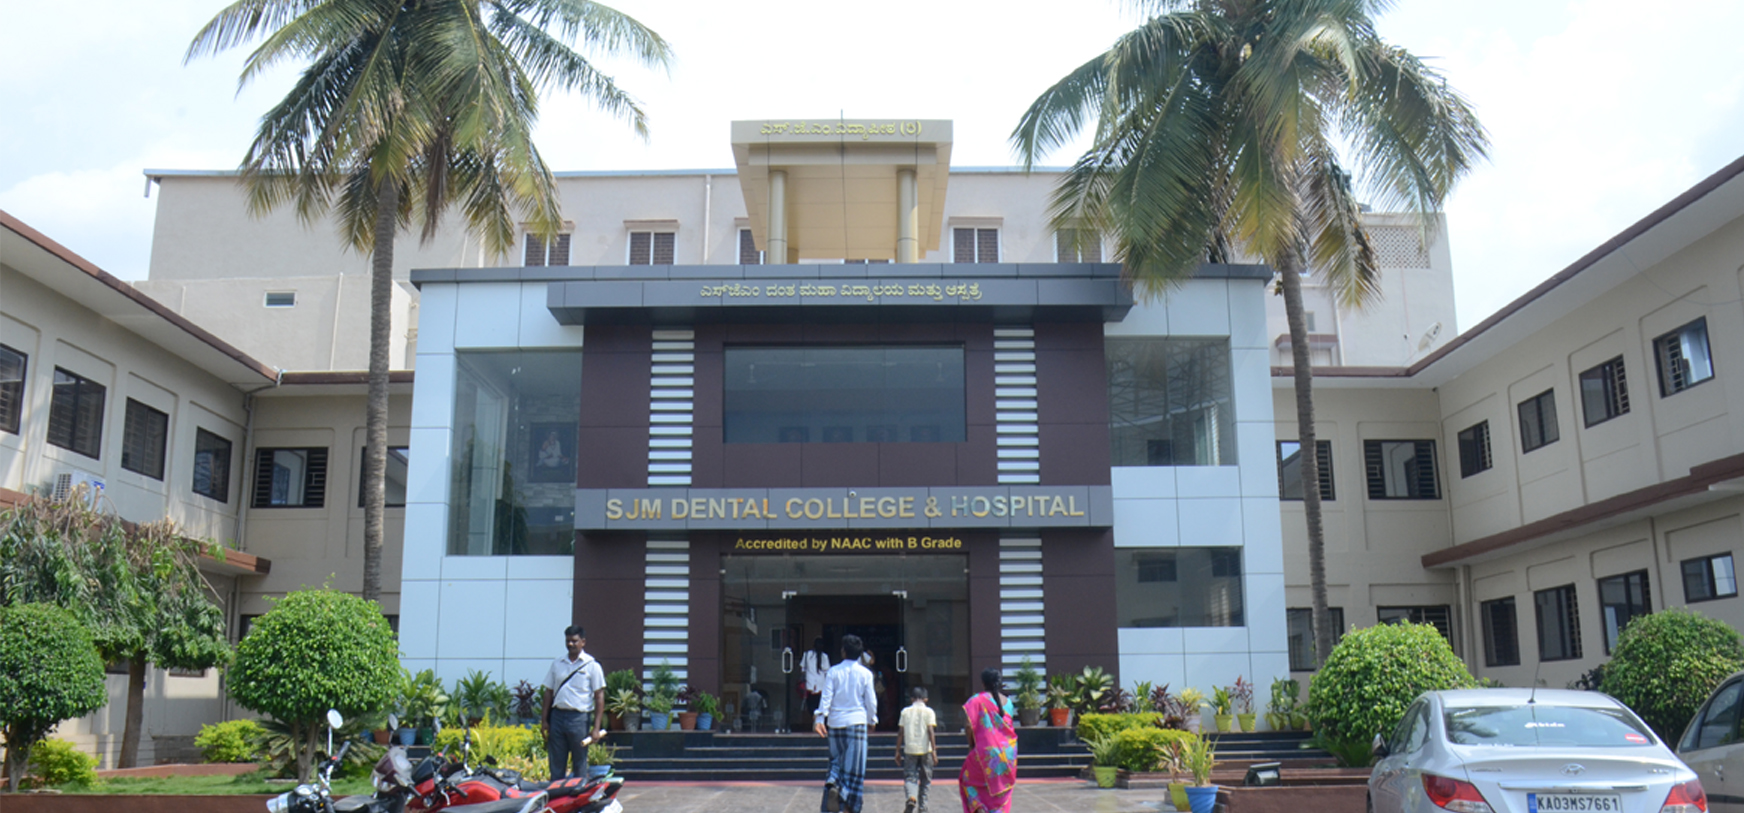 SJM Dental College Chitradurga Admission, Courses Offered, Fees structure, Placements, Facilities